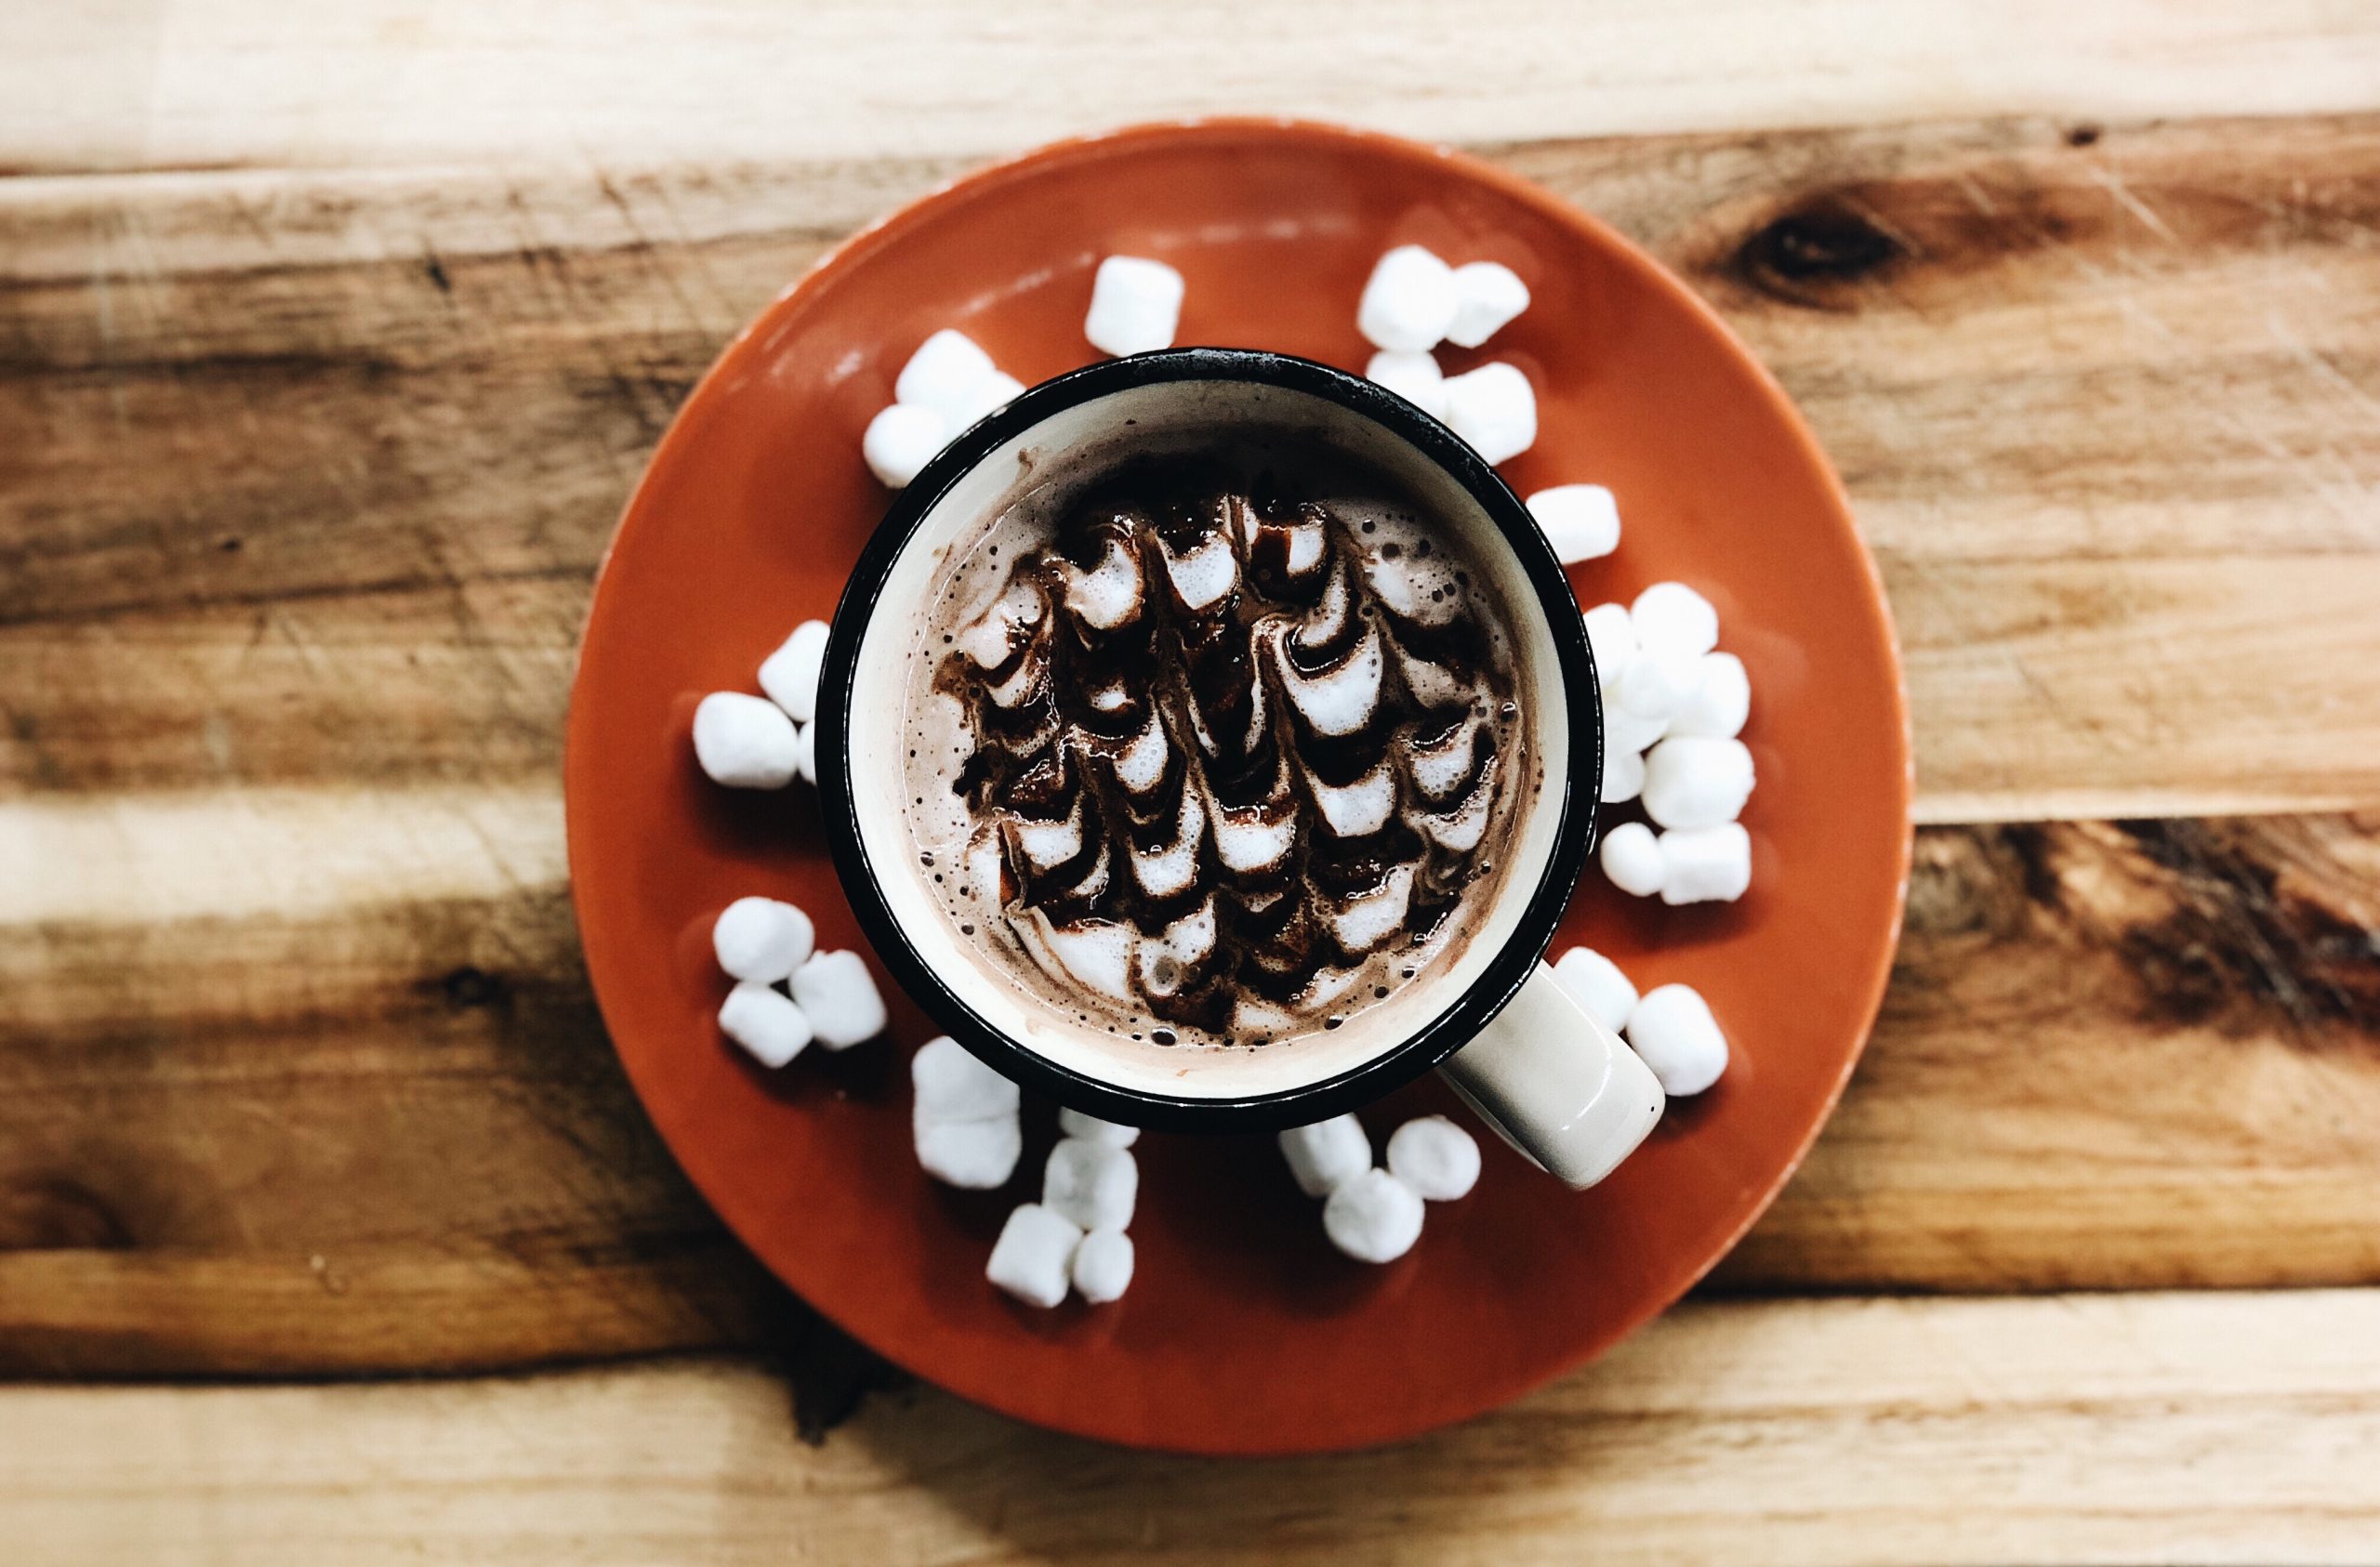 A study confirms that drinking cocoa before exercise increases blood flow